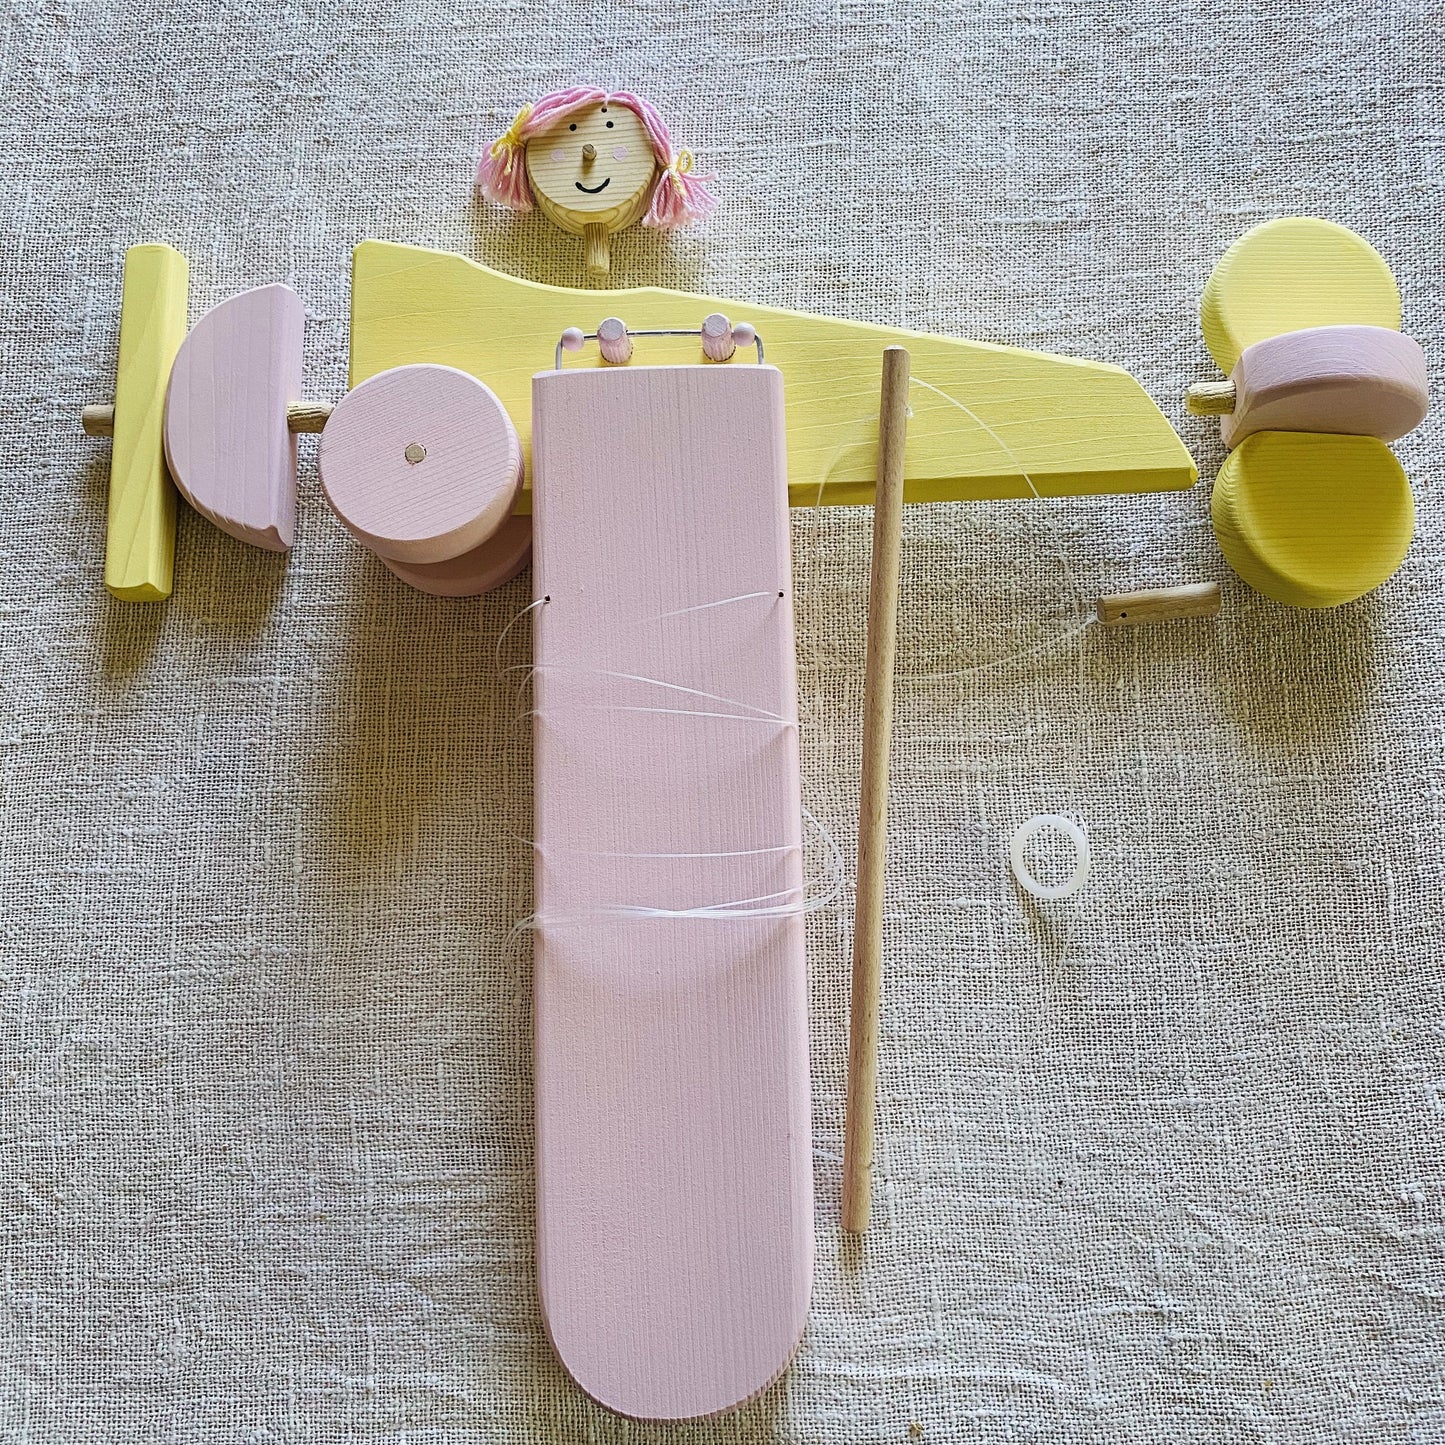 wooden toy airplane